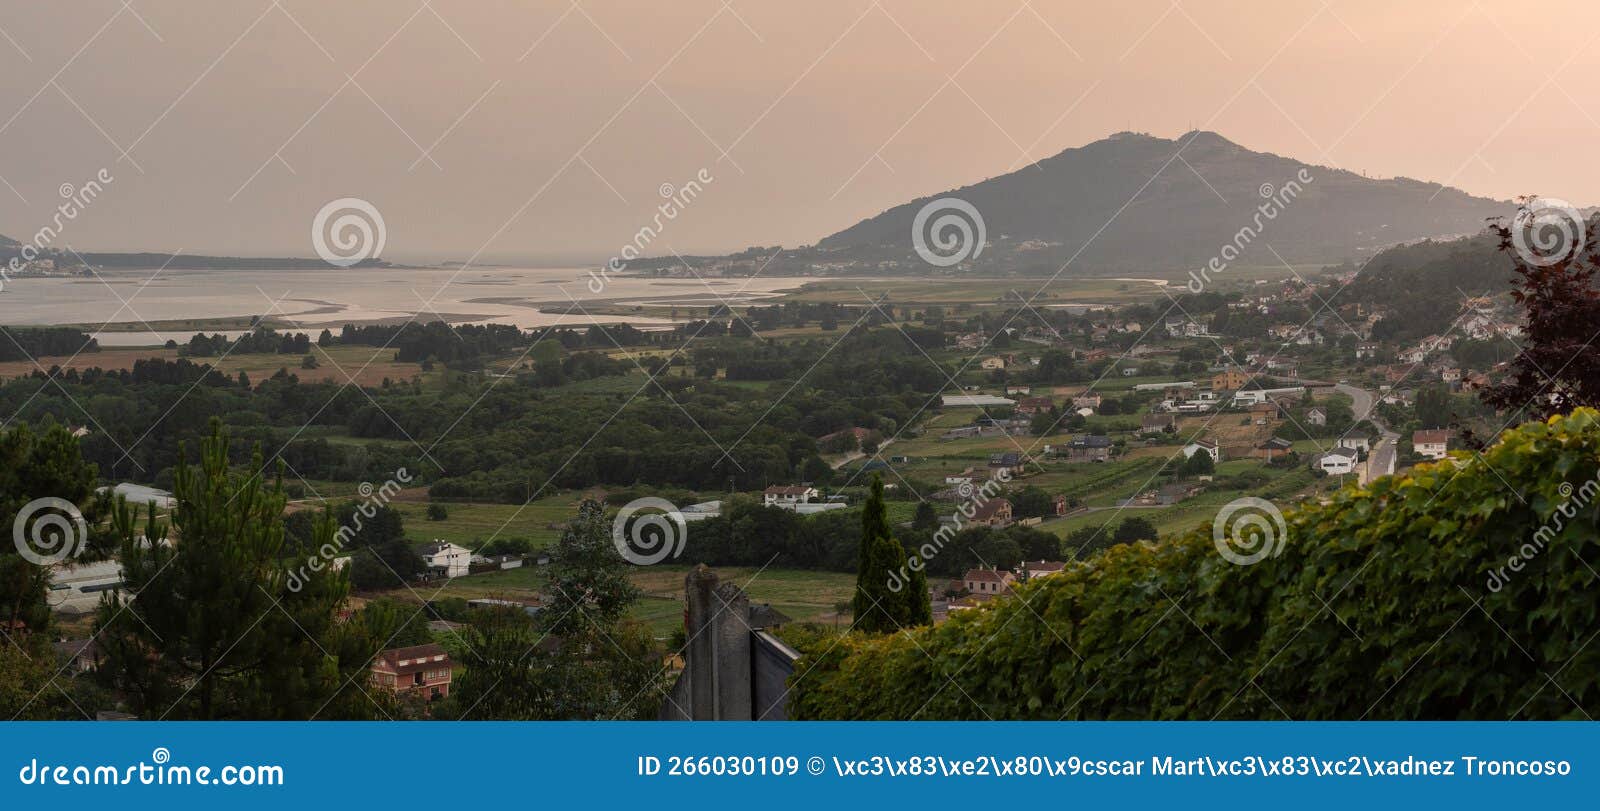 panoramic view of the miÃÂ±o river, the mountain santa tecla and the towns of the rosal and a guarda